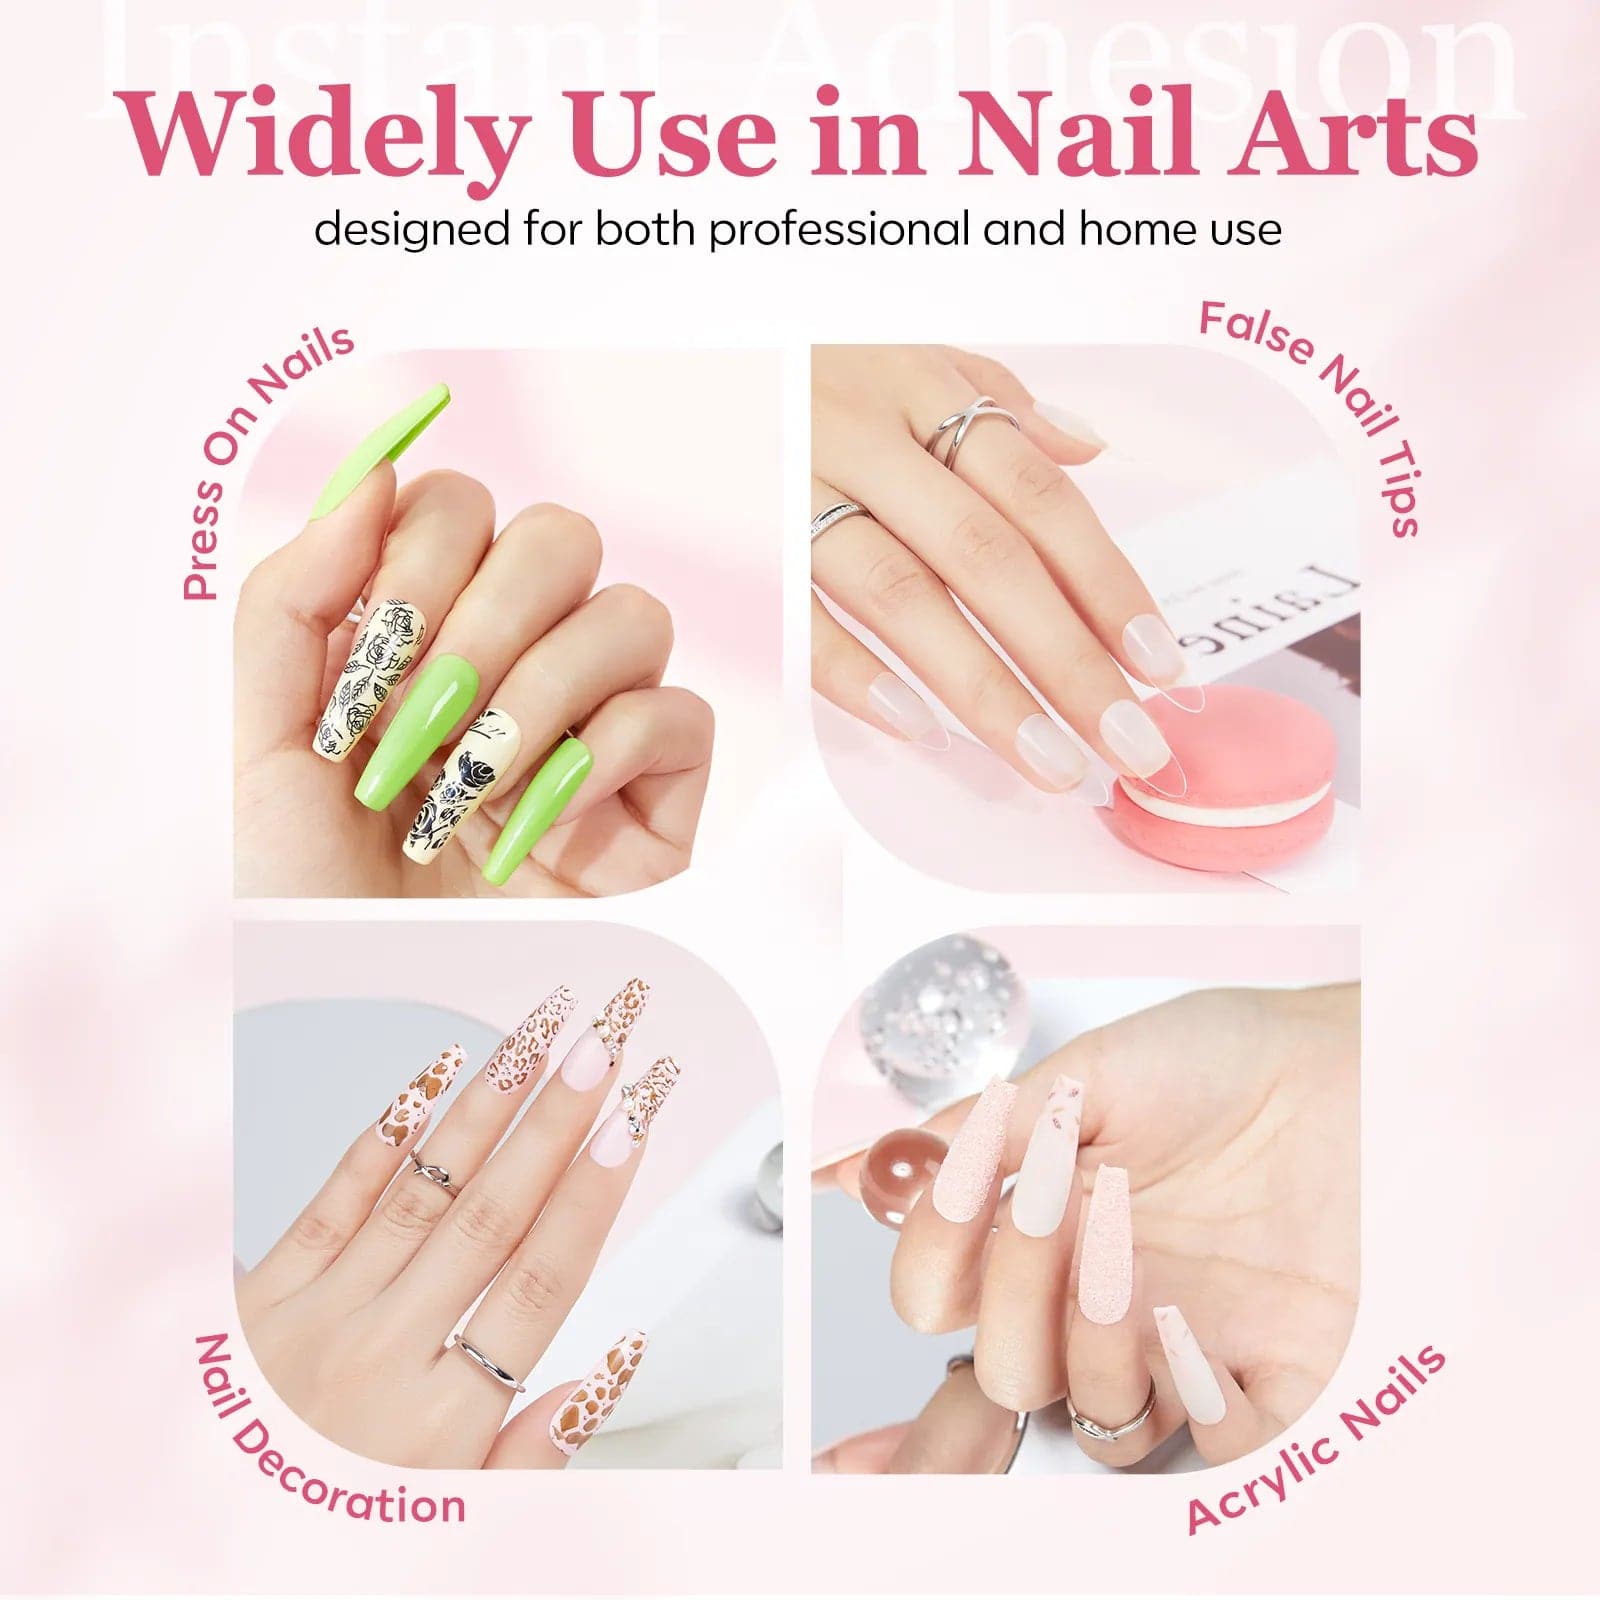 Modelones Instant Adhesion Nail Glue 20Pcs Pack【US ONLY]